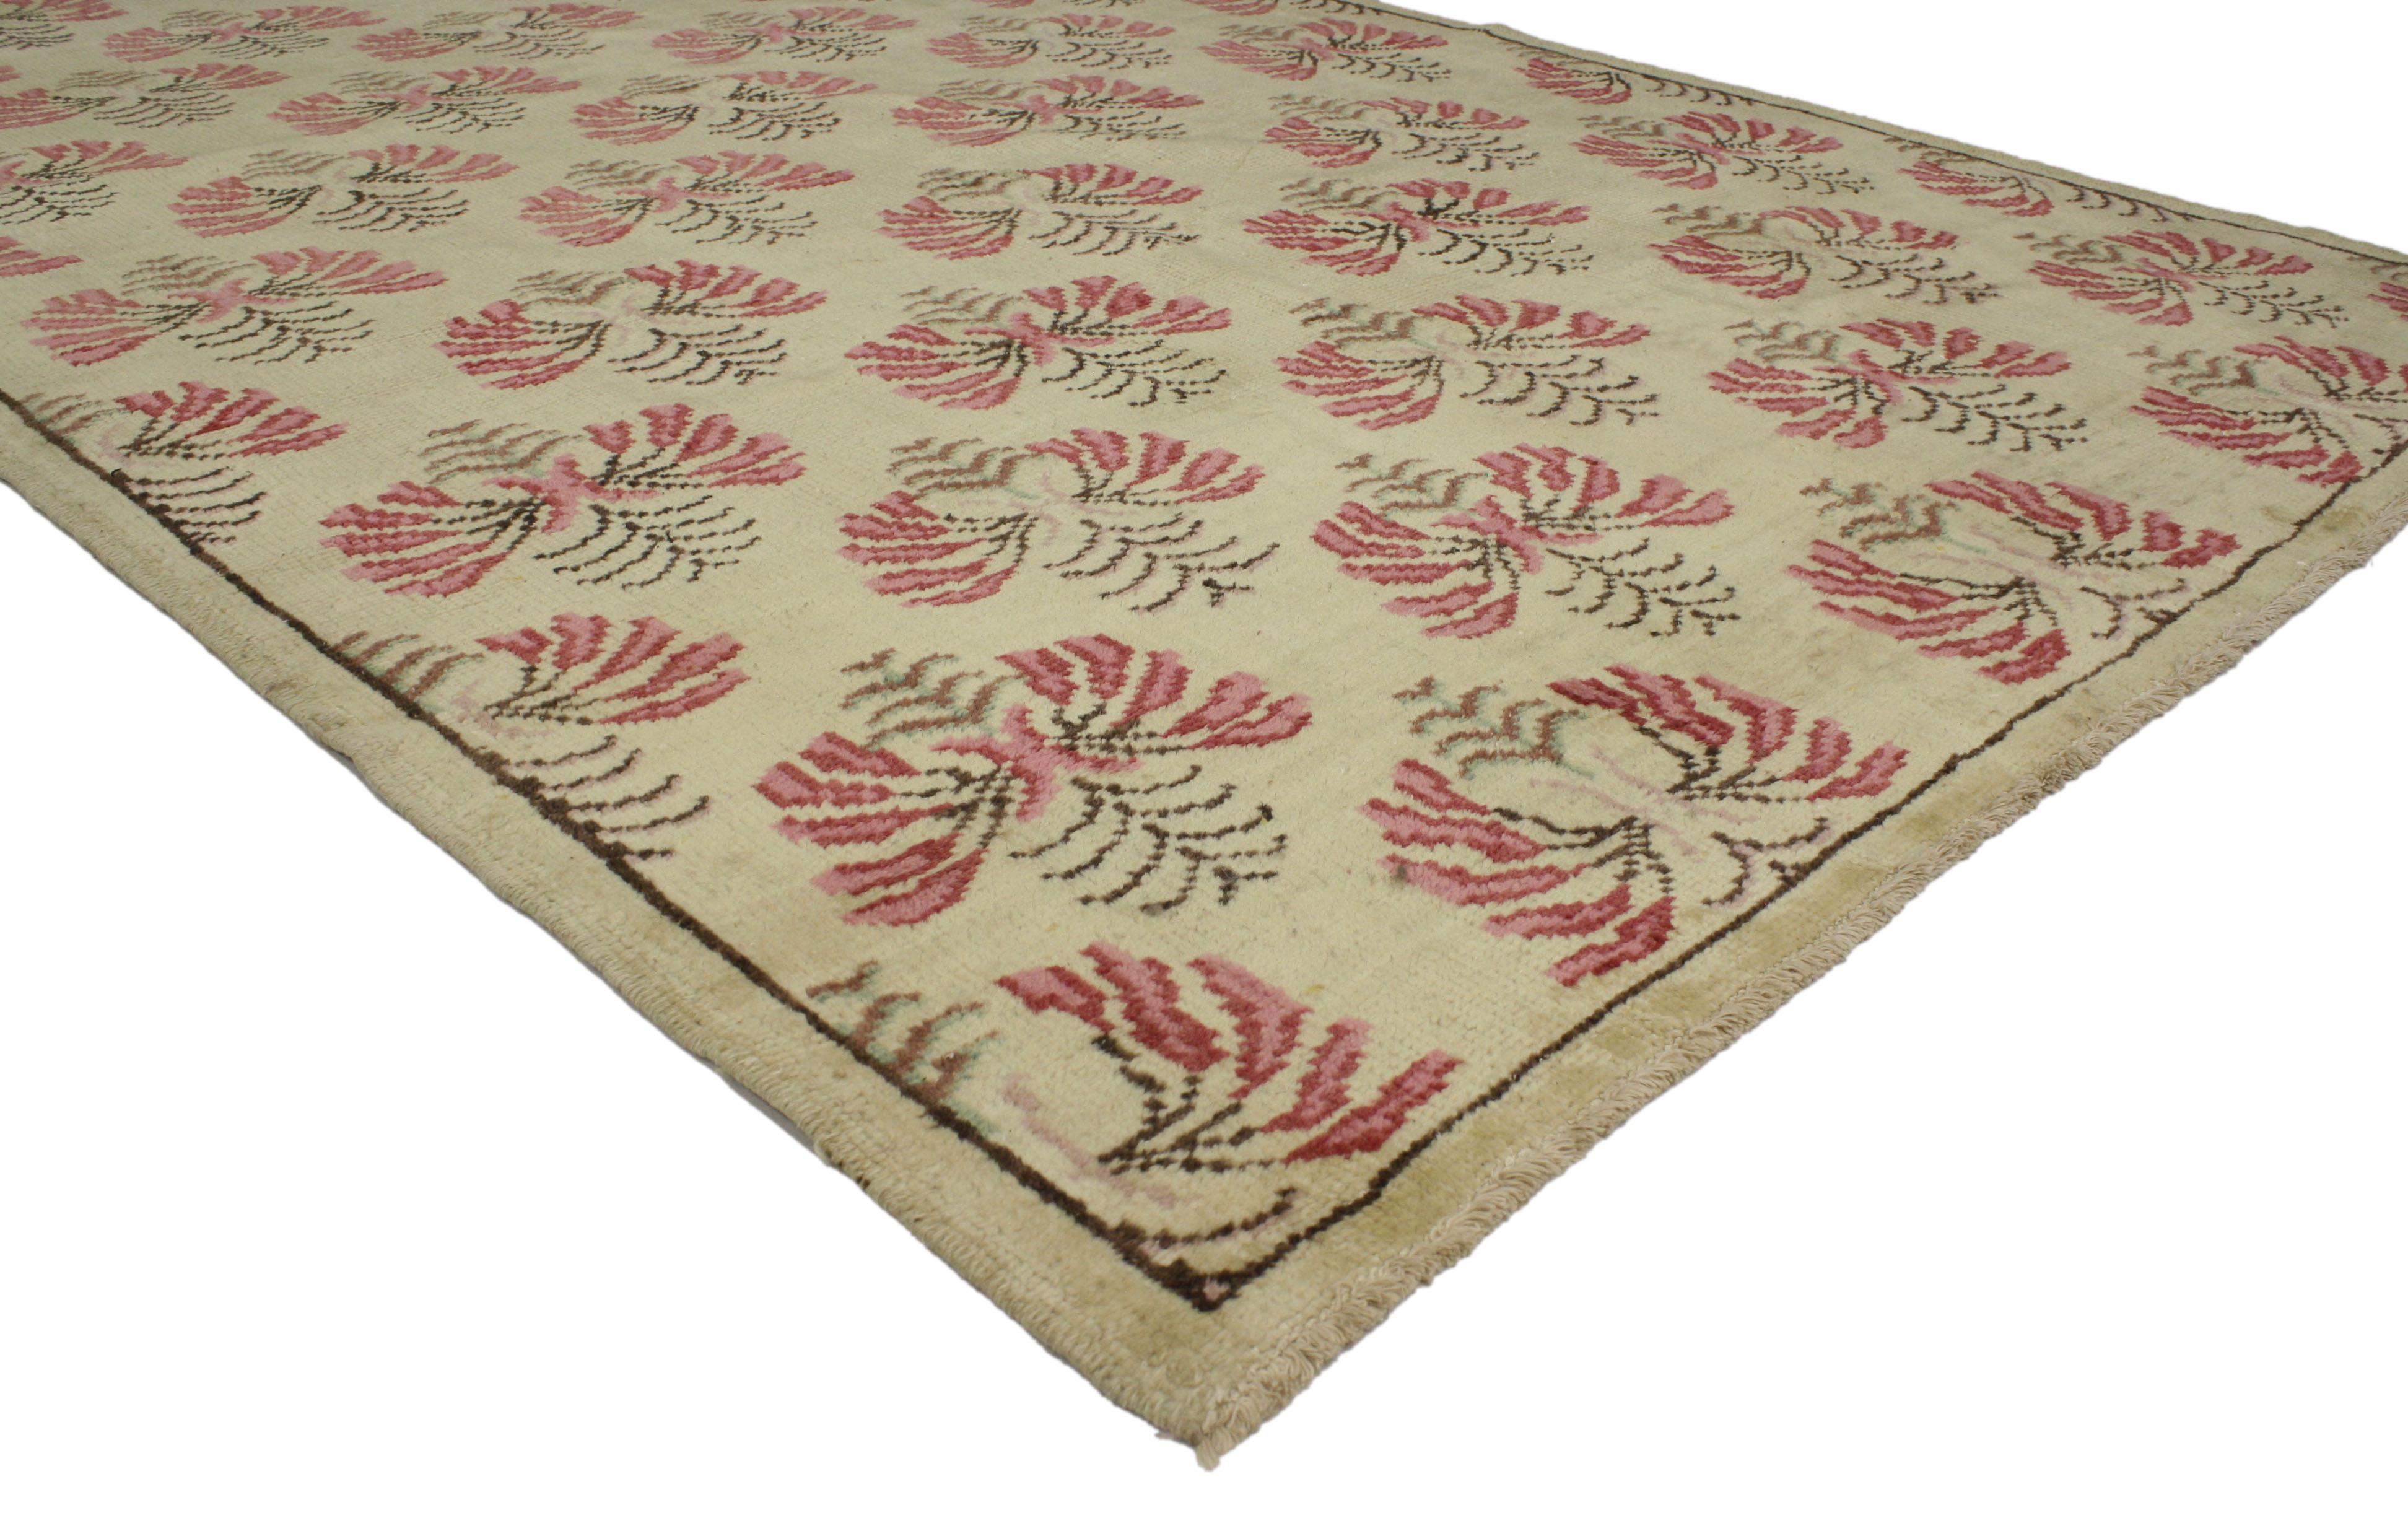 52149, vintage Turkish Oushak rug with shabby chic farmhouse style. Quaint and vivacious, this hand-knotted woo vintage Turkish Oushak rug features the shabby chic farmhouse look so desirable in understated, welcoming, 